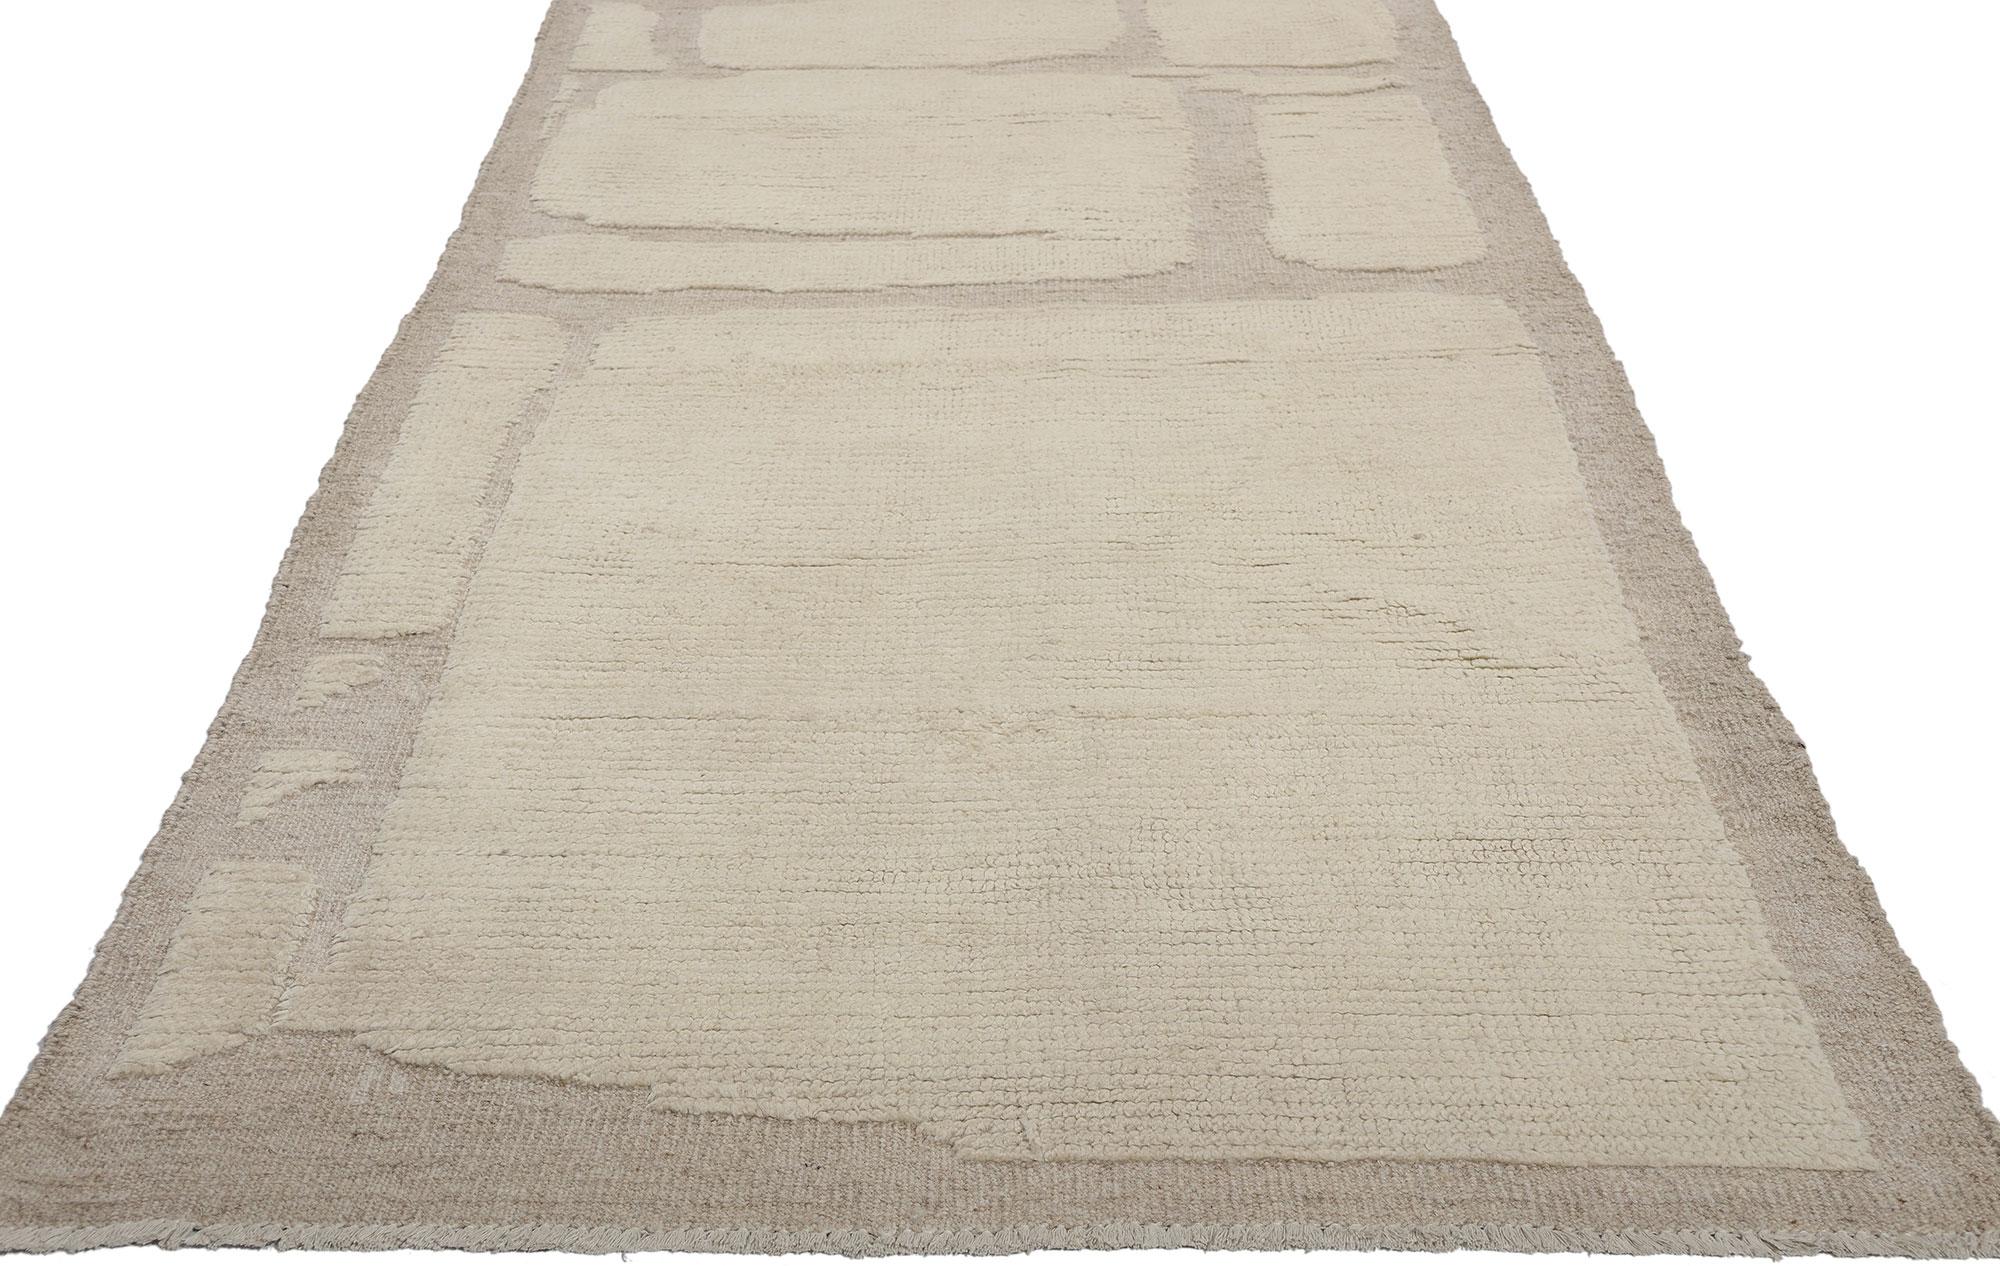 81105 Organic Modern Moroccan High-Low Rug Runner, 02'10 x 14'00. Behold our latest masterpiece: the hand-knotted wool organic modern Moroccan rug runner. A stunning fusion of Biophilic Japandi and Wabi-Sabi design philosophies, meticulously crafted